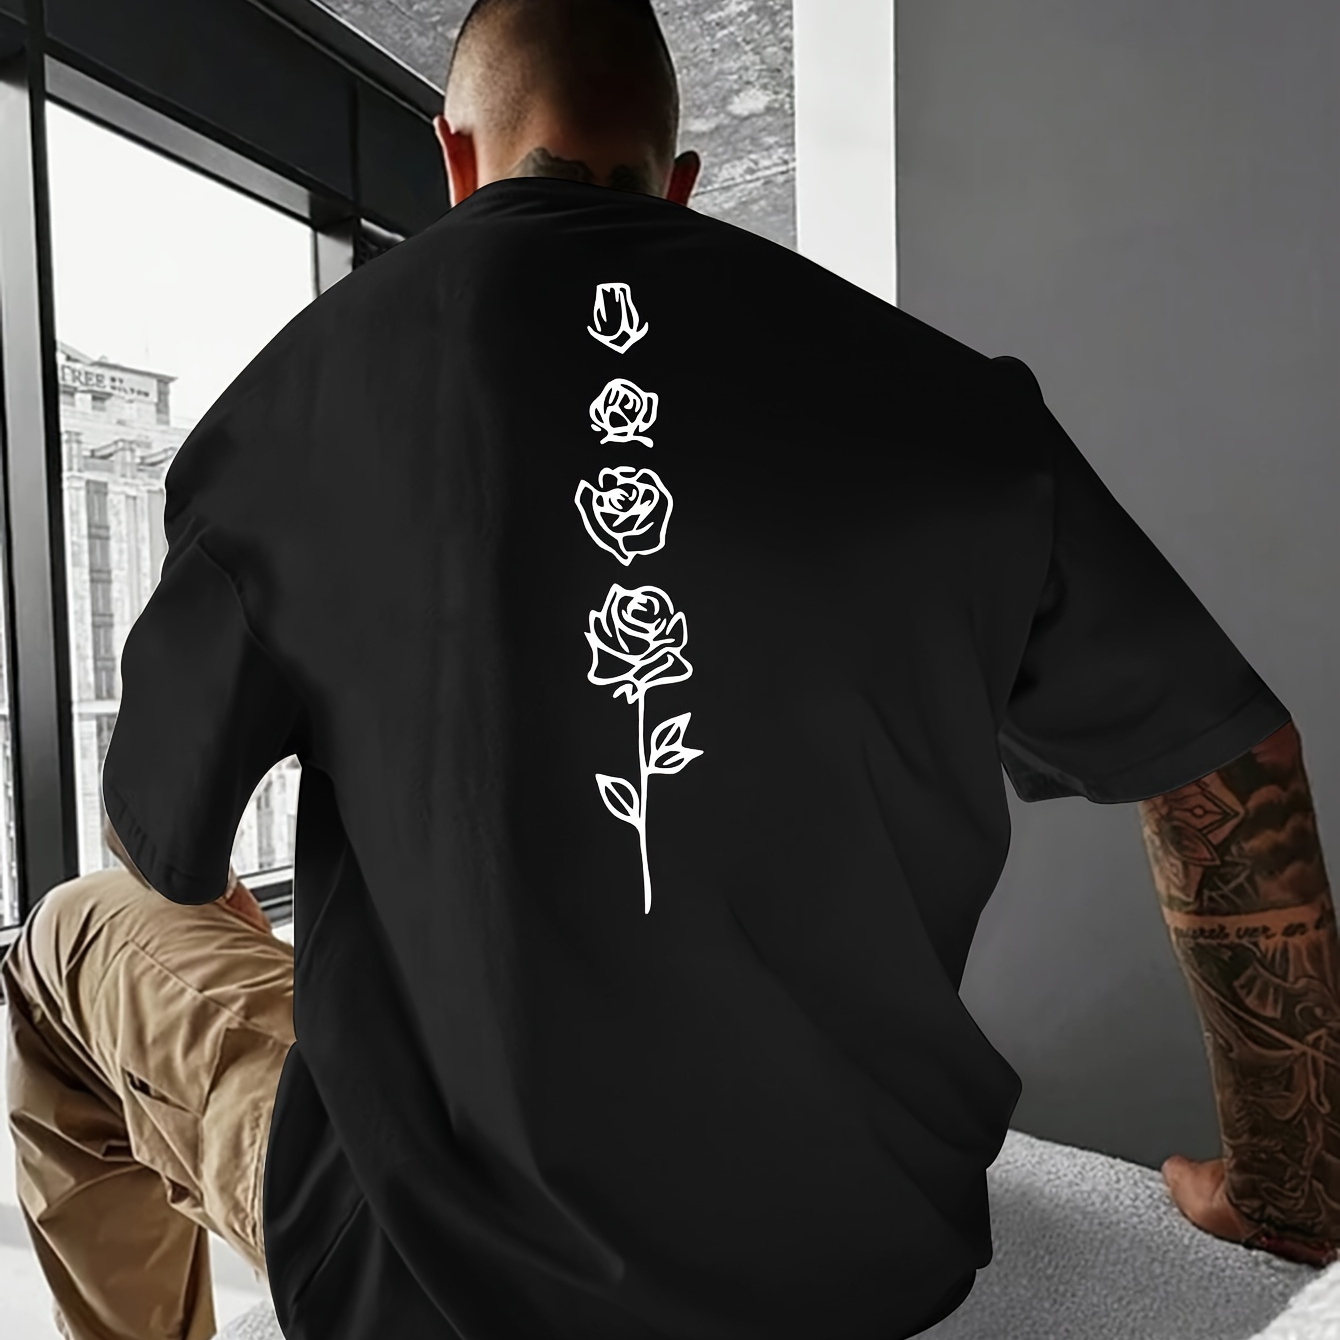 

Rose Print, Men's Graphic Design Crew Neck T-shirt, Casual Comfy Tees Tshirts For Summer, Men's Clothing Tops For Daily Vacation Resorts